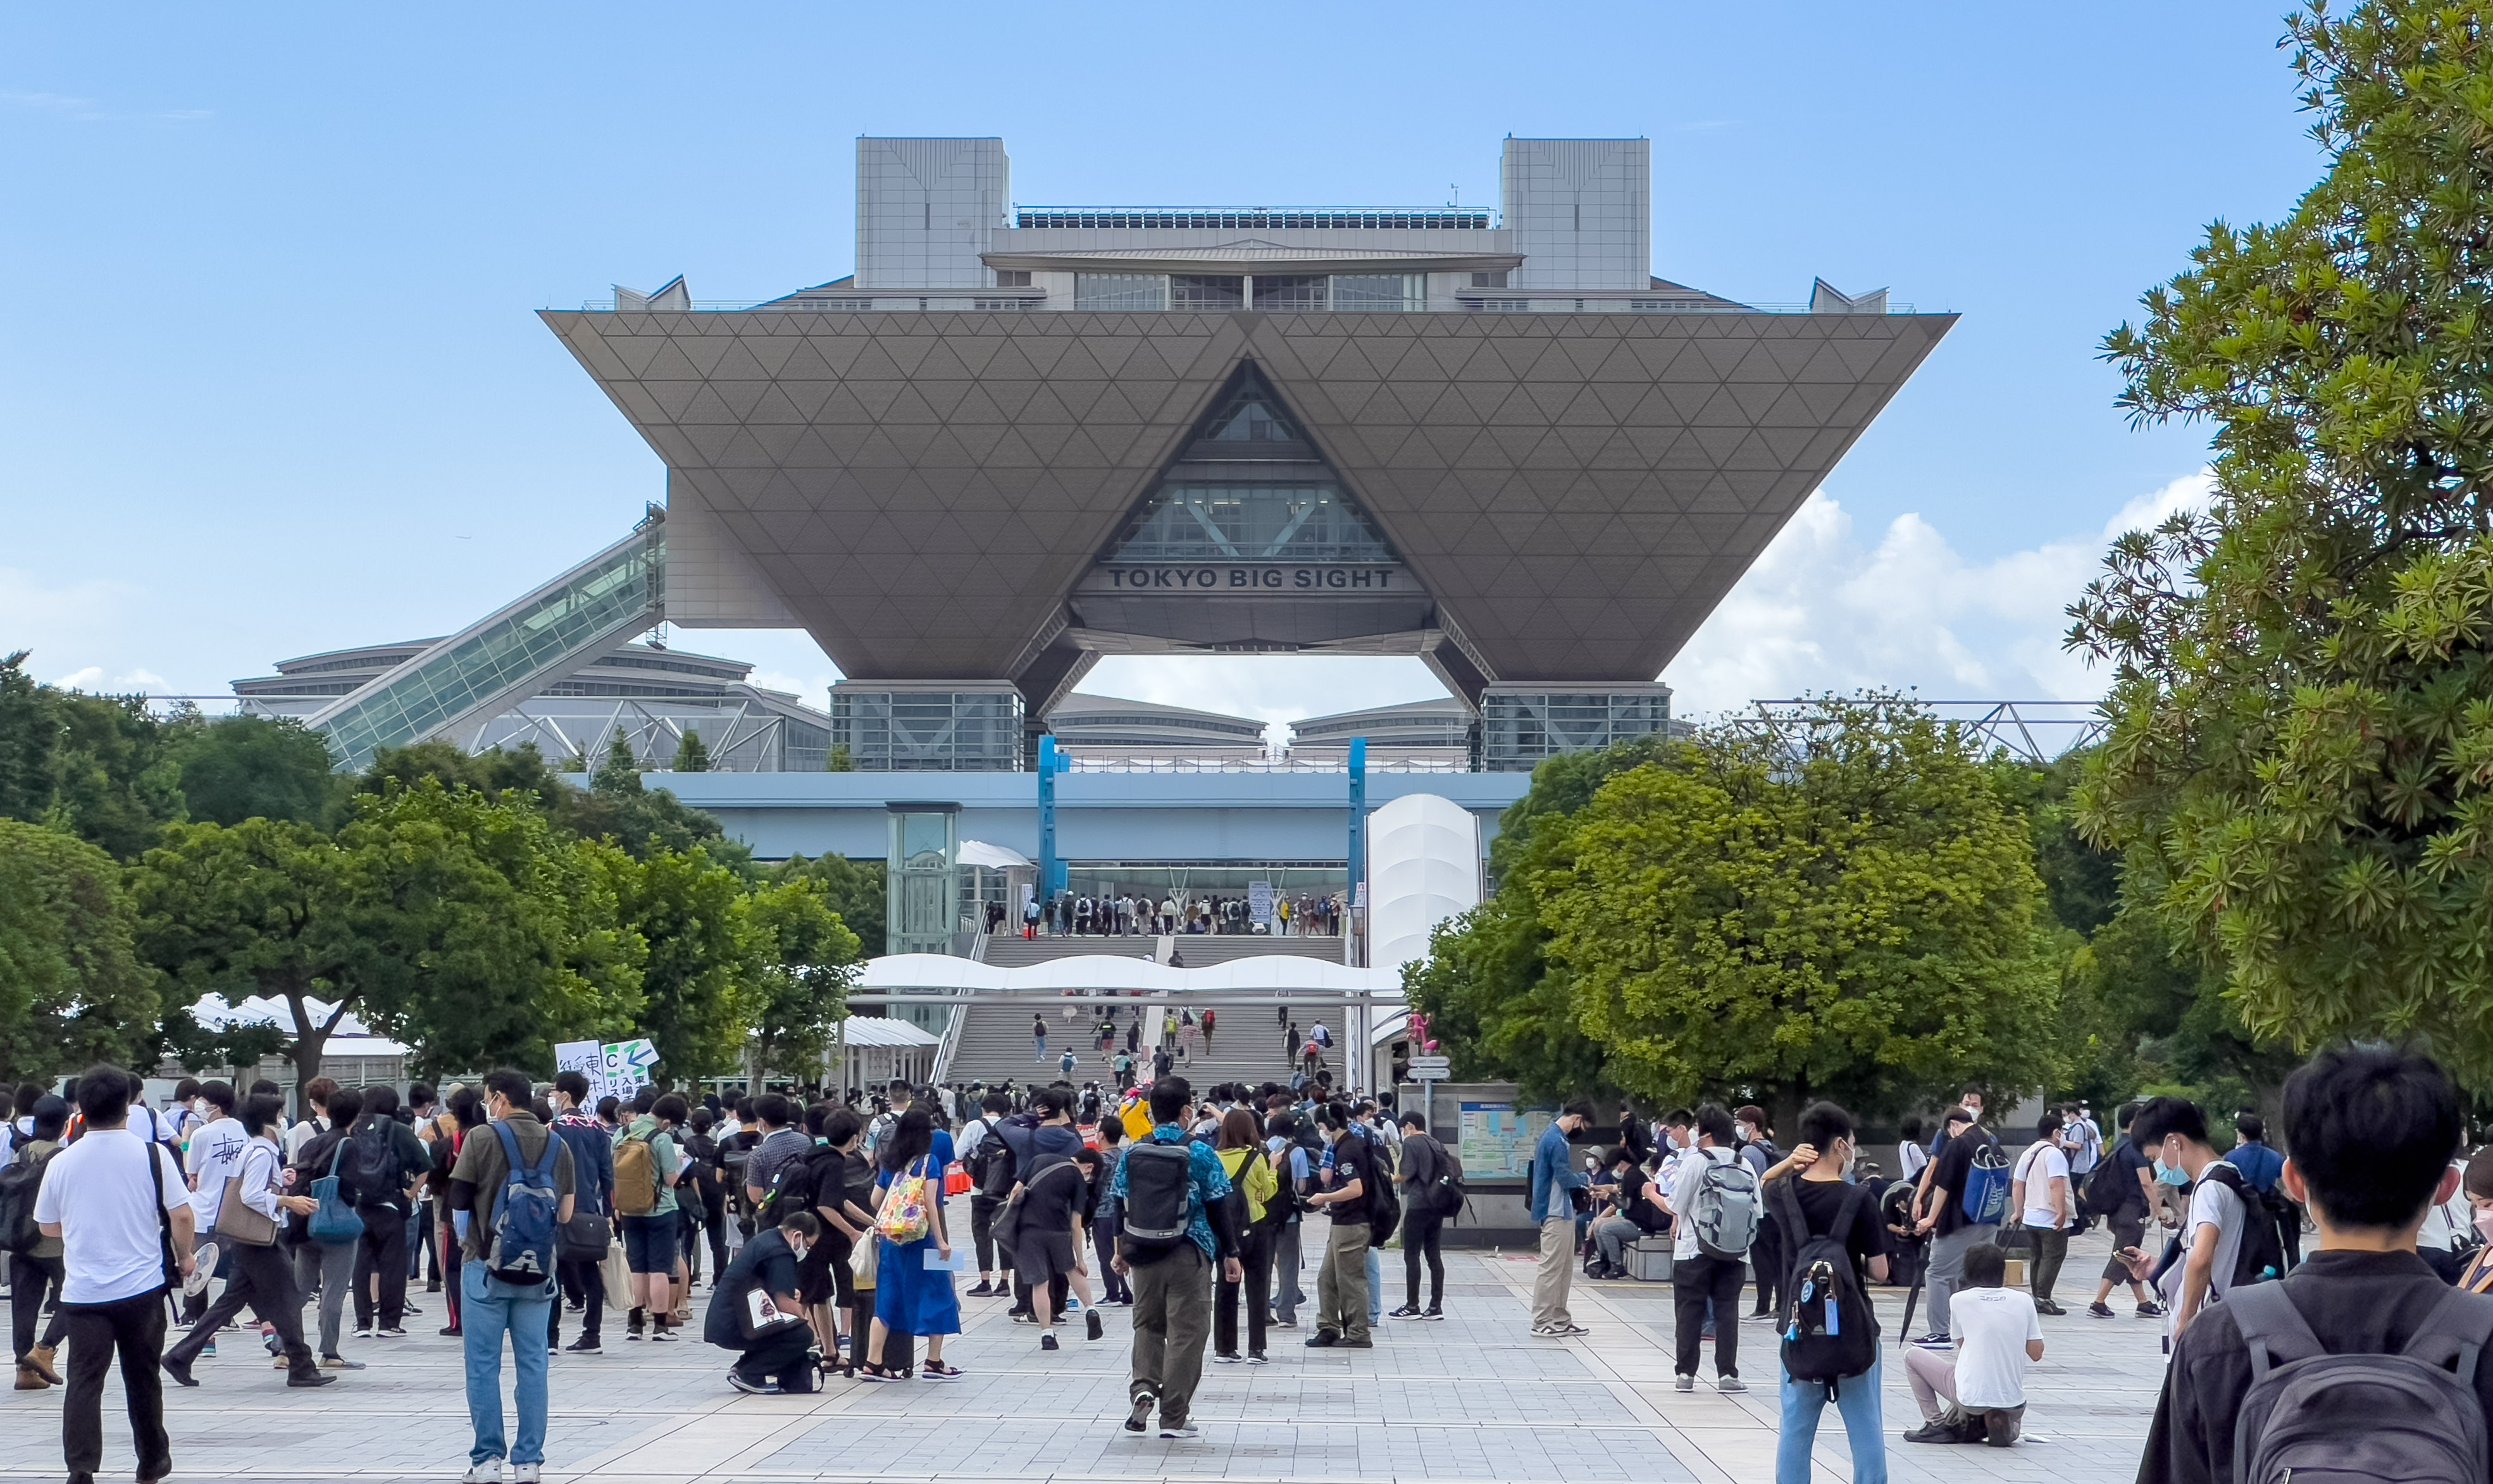 Comiket 101 Records 180,000 Attendees Over Two Day Event